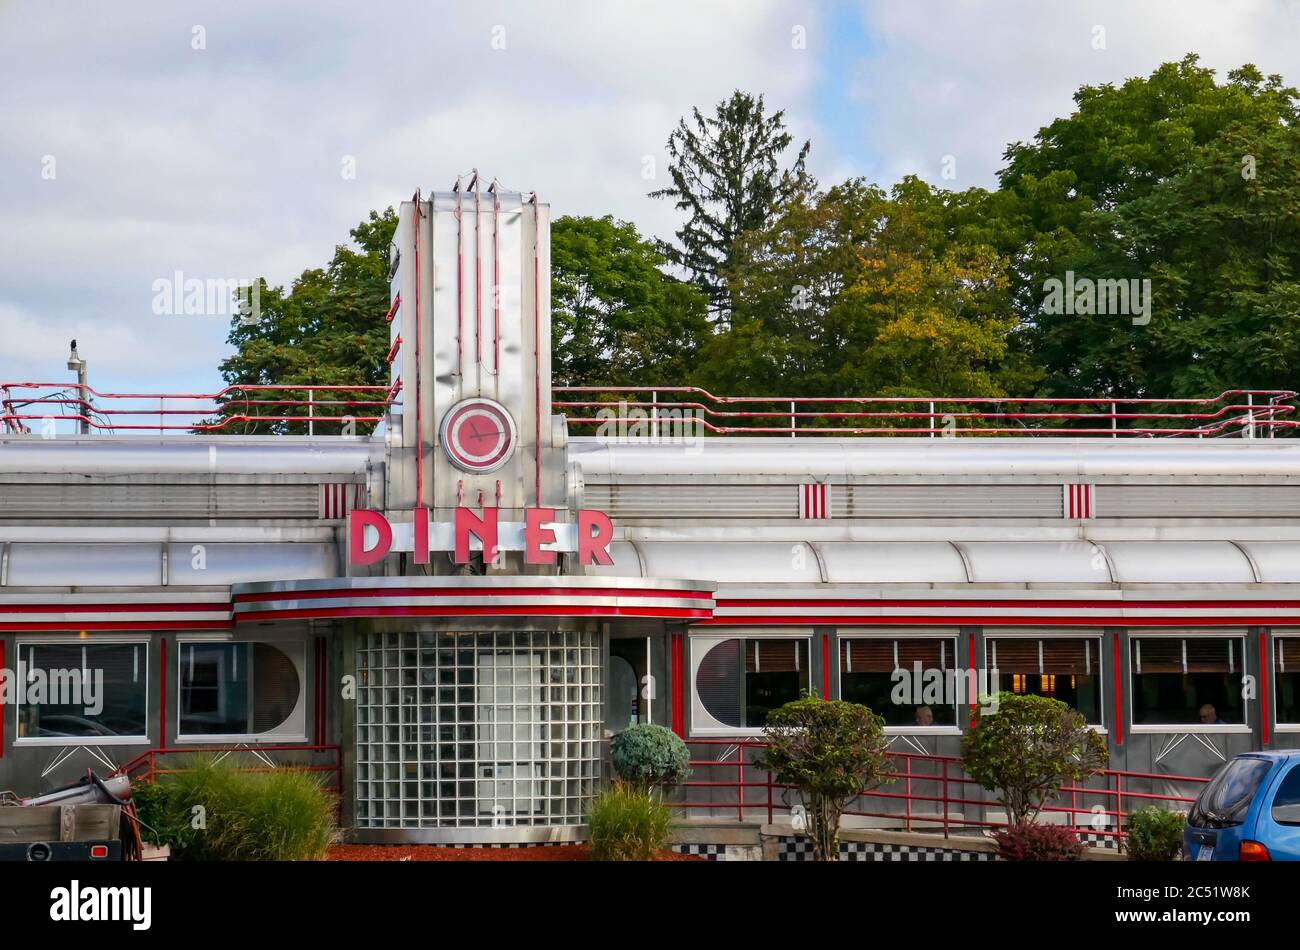 Classic 1930s Art Deco style American diner, Eveready Diner, Poughkeepsie, New York, USA Stock Photo